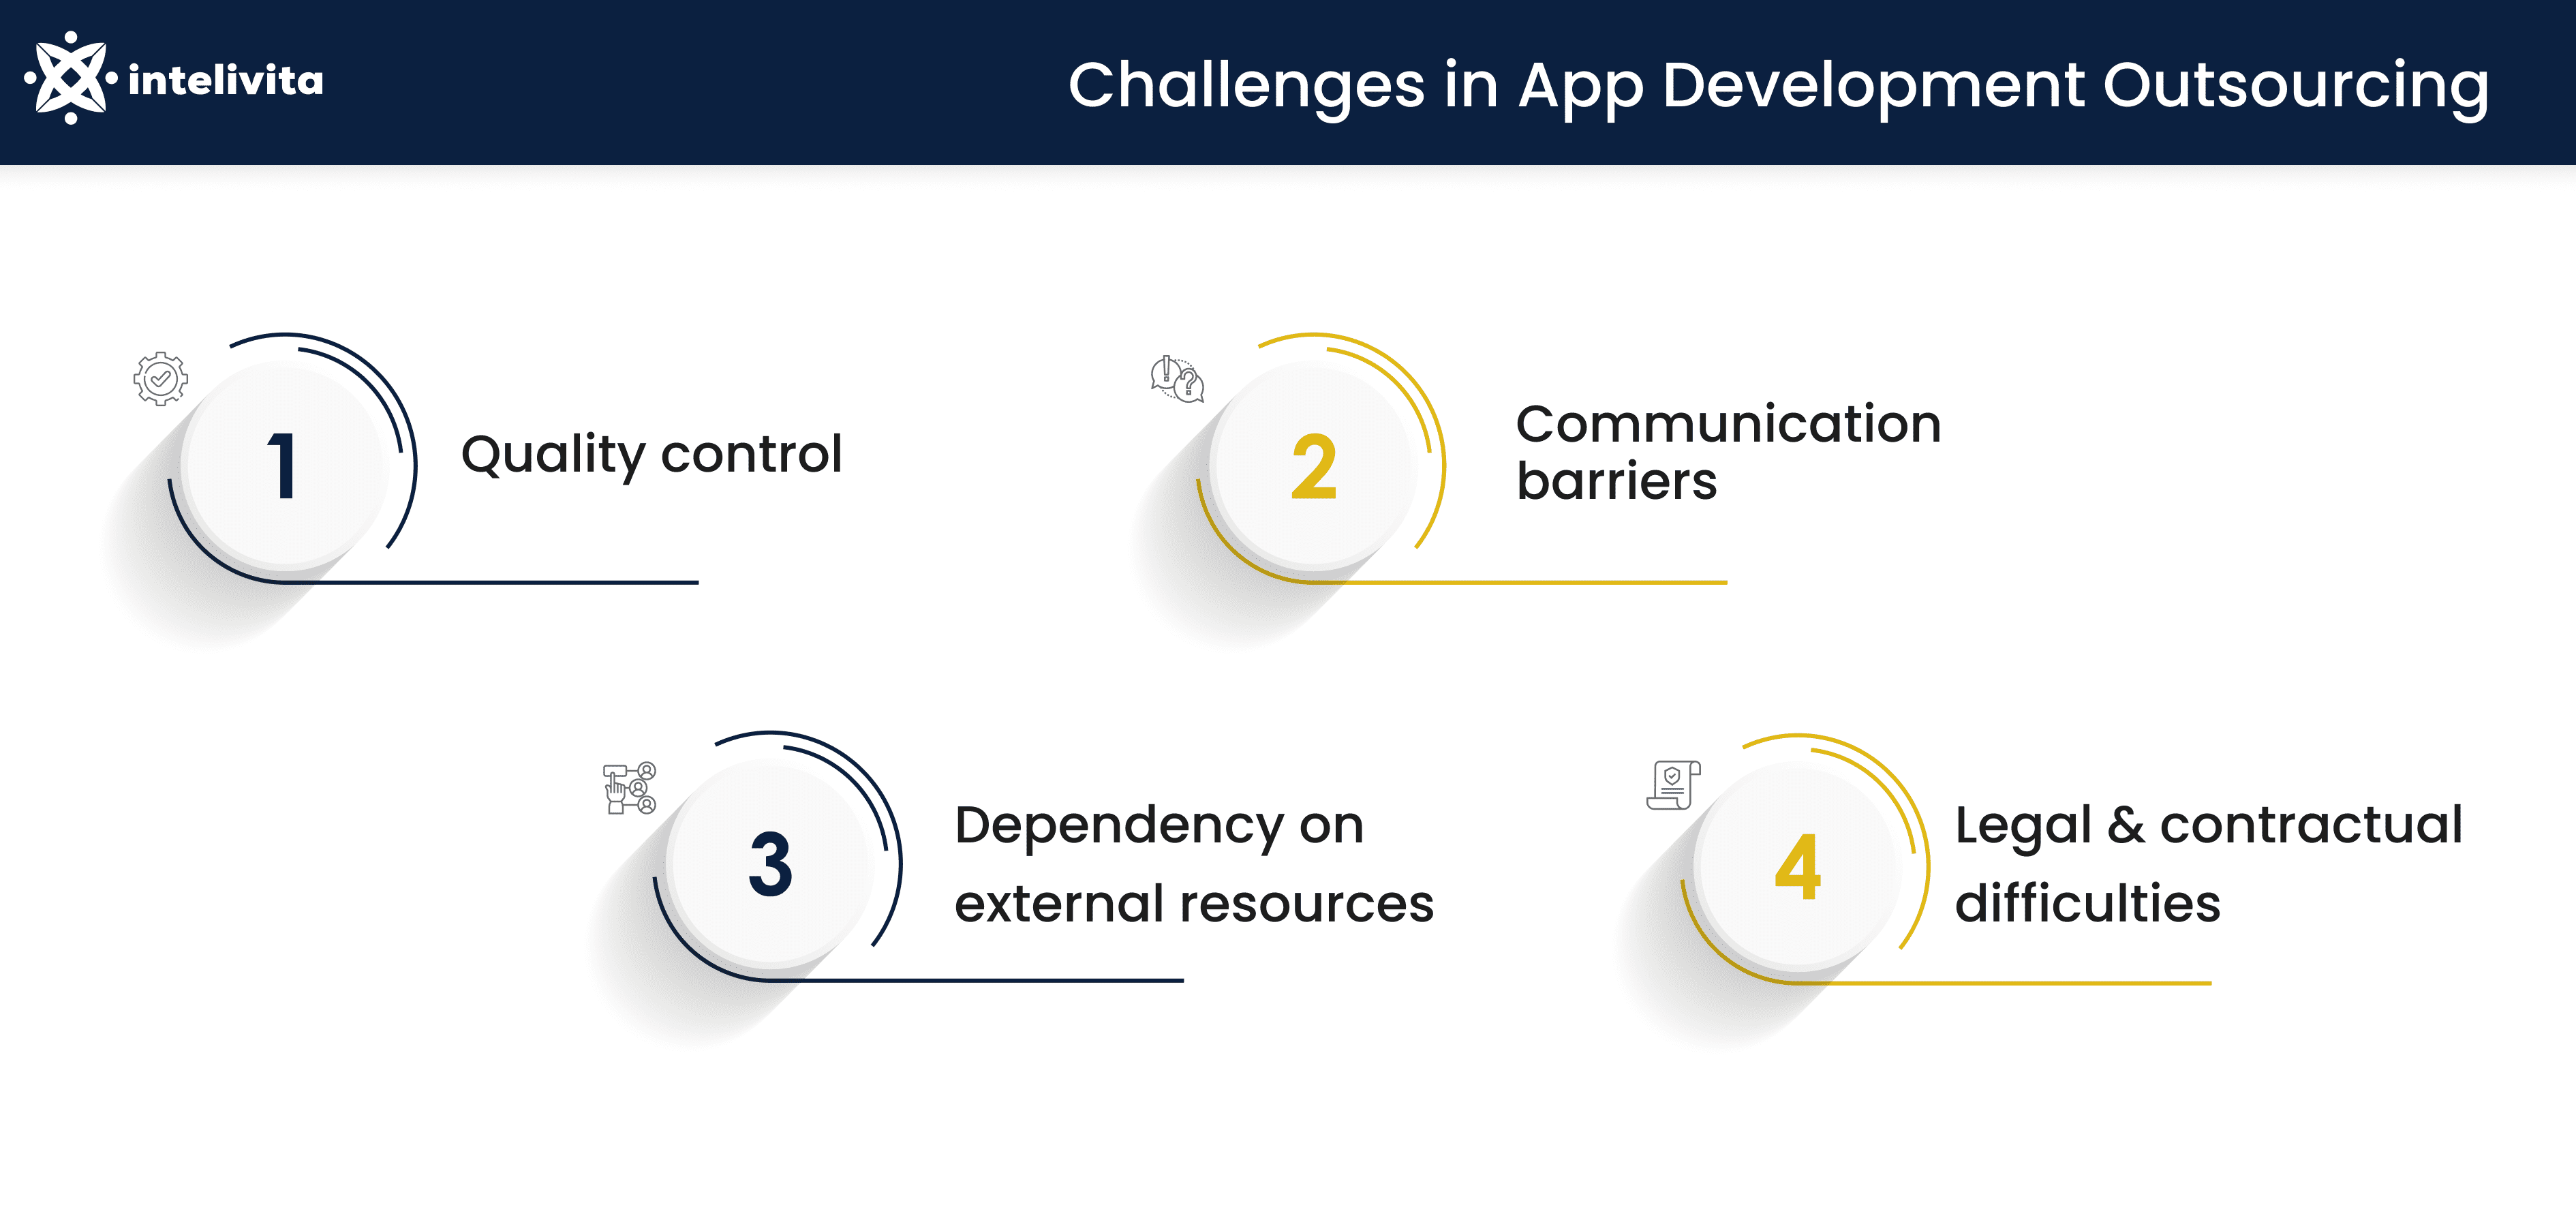 Image displaying the challenges when outsourcing application development namely: 1- Quality control, 2- Communication barriers, 3- Dependency on external resources and, 4- Legal and contractual difficulties.